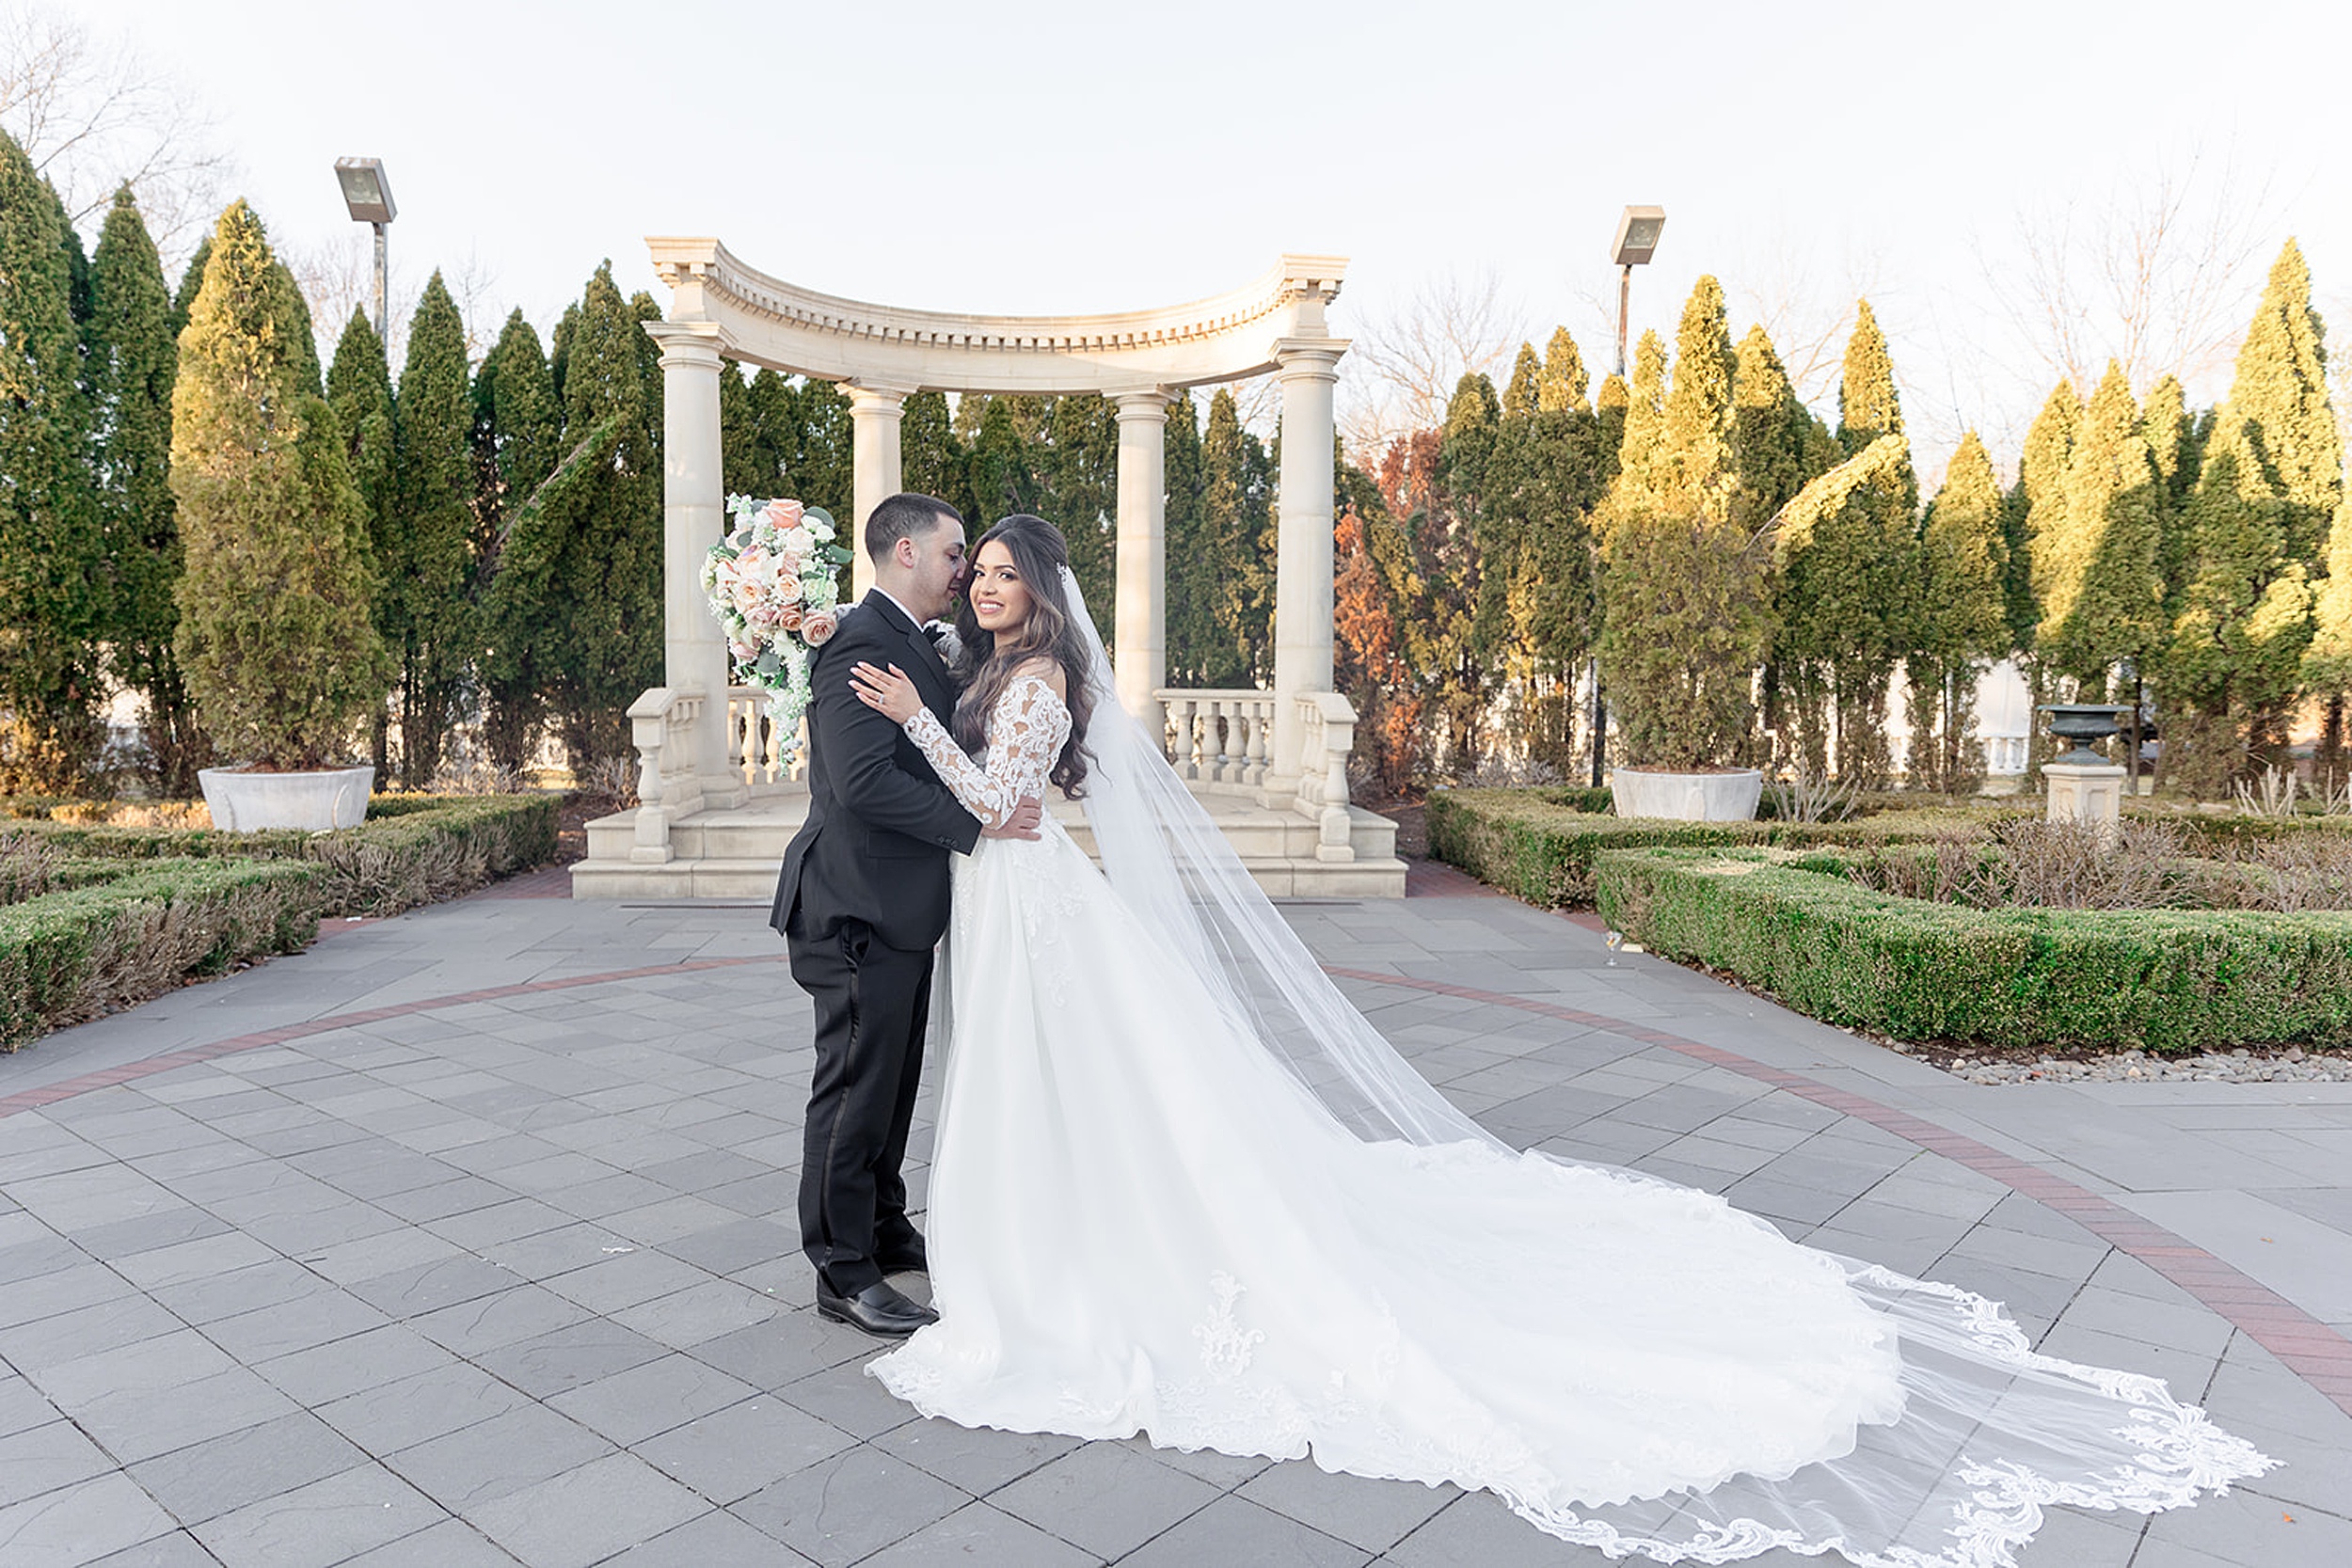 NEwlyweds embrace while standing in a stone garden patio